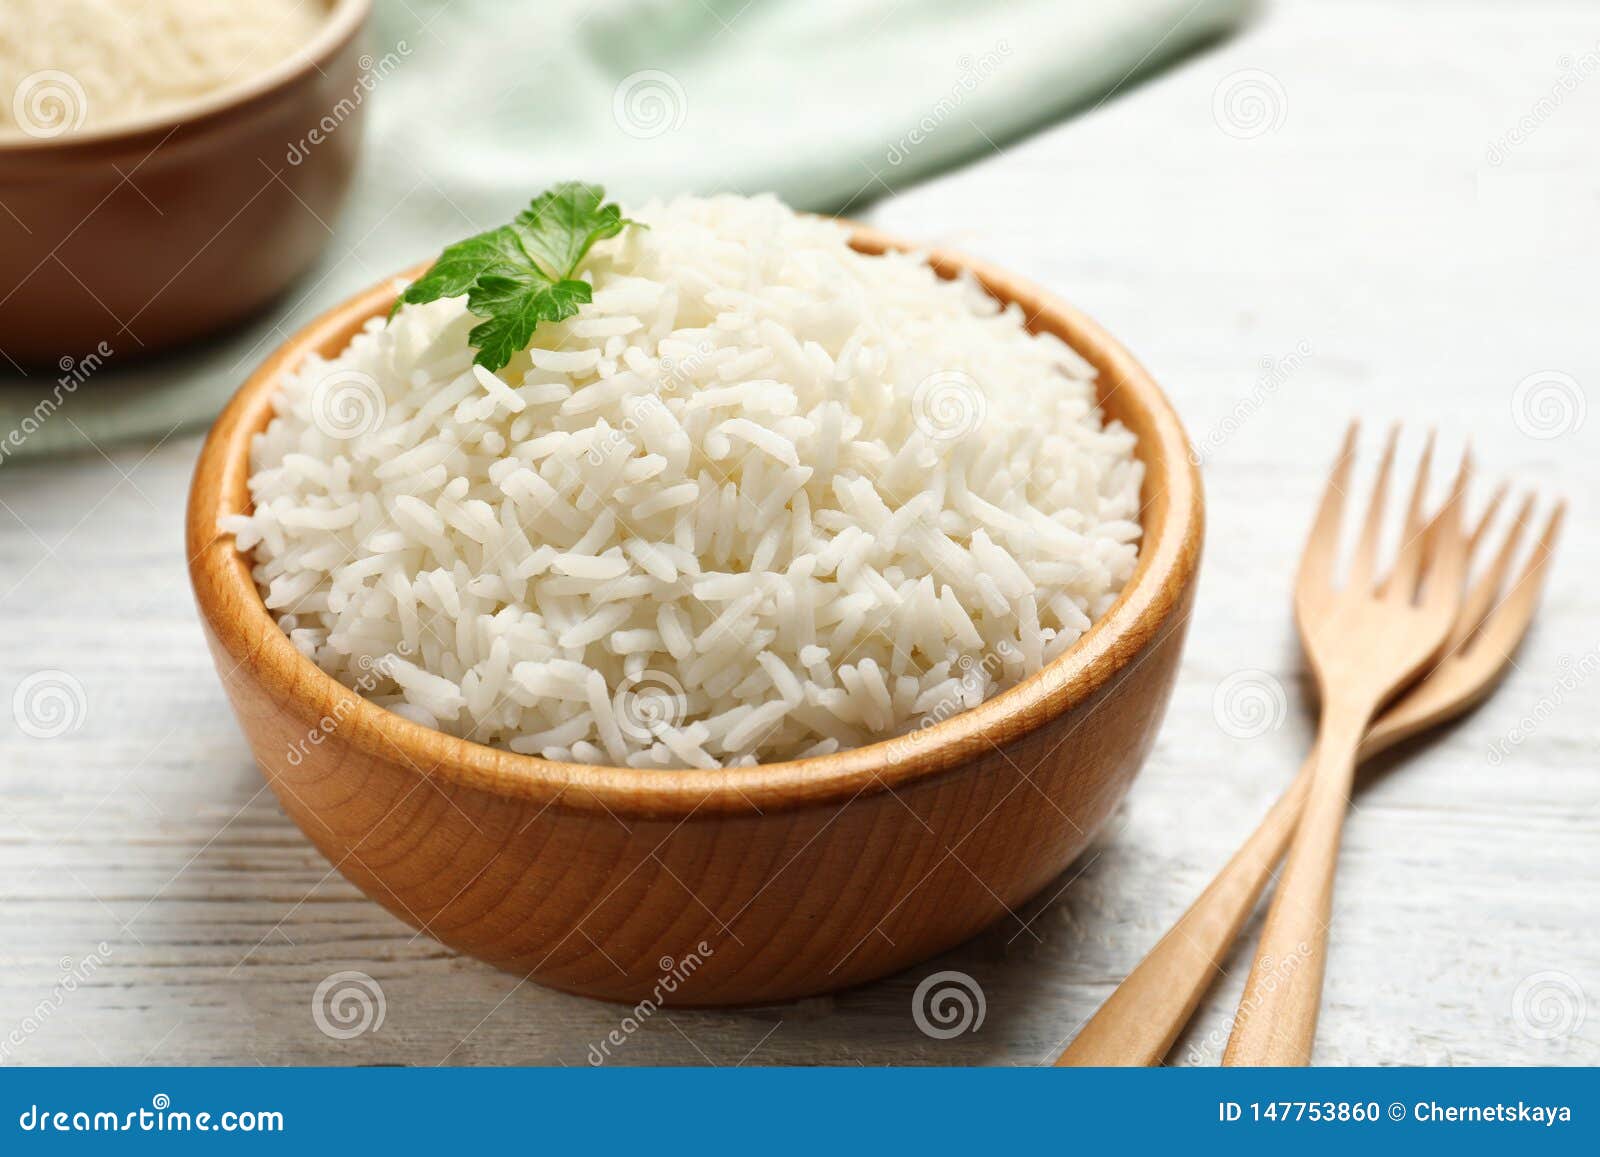 bowl of tasty cooked rice on table